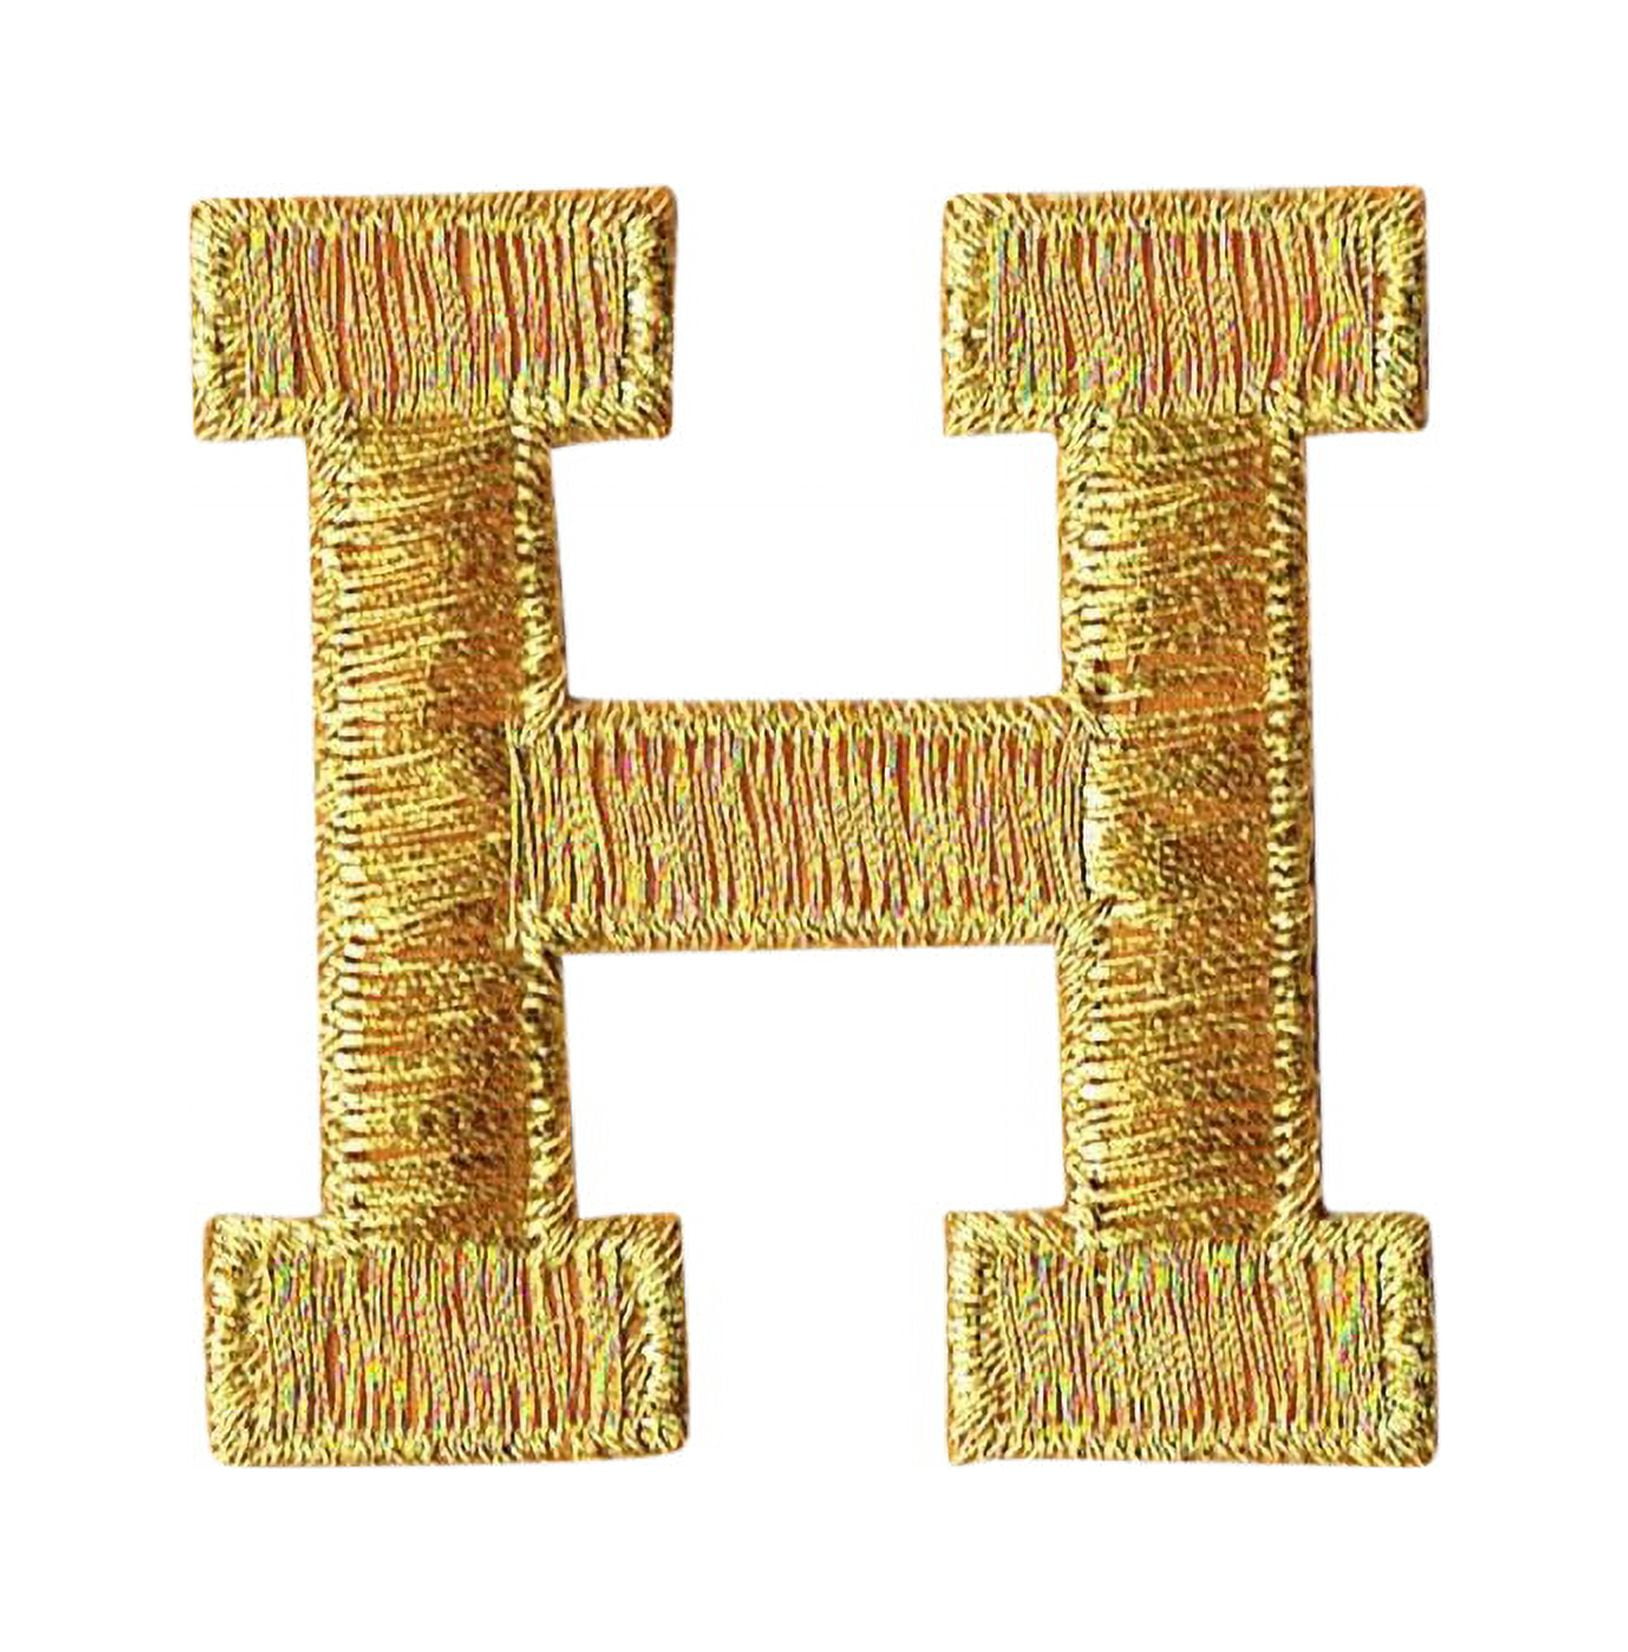 26 Letter Set Chenille Iron On Glitter Varsity Letter Patches - Pink  Chenille Fabric With Gold Glitter Trim - Sew or Iron on - 5.5 cm Tall 